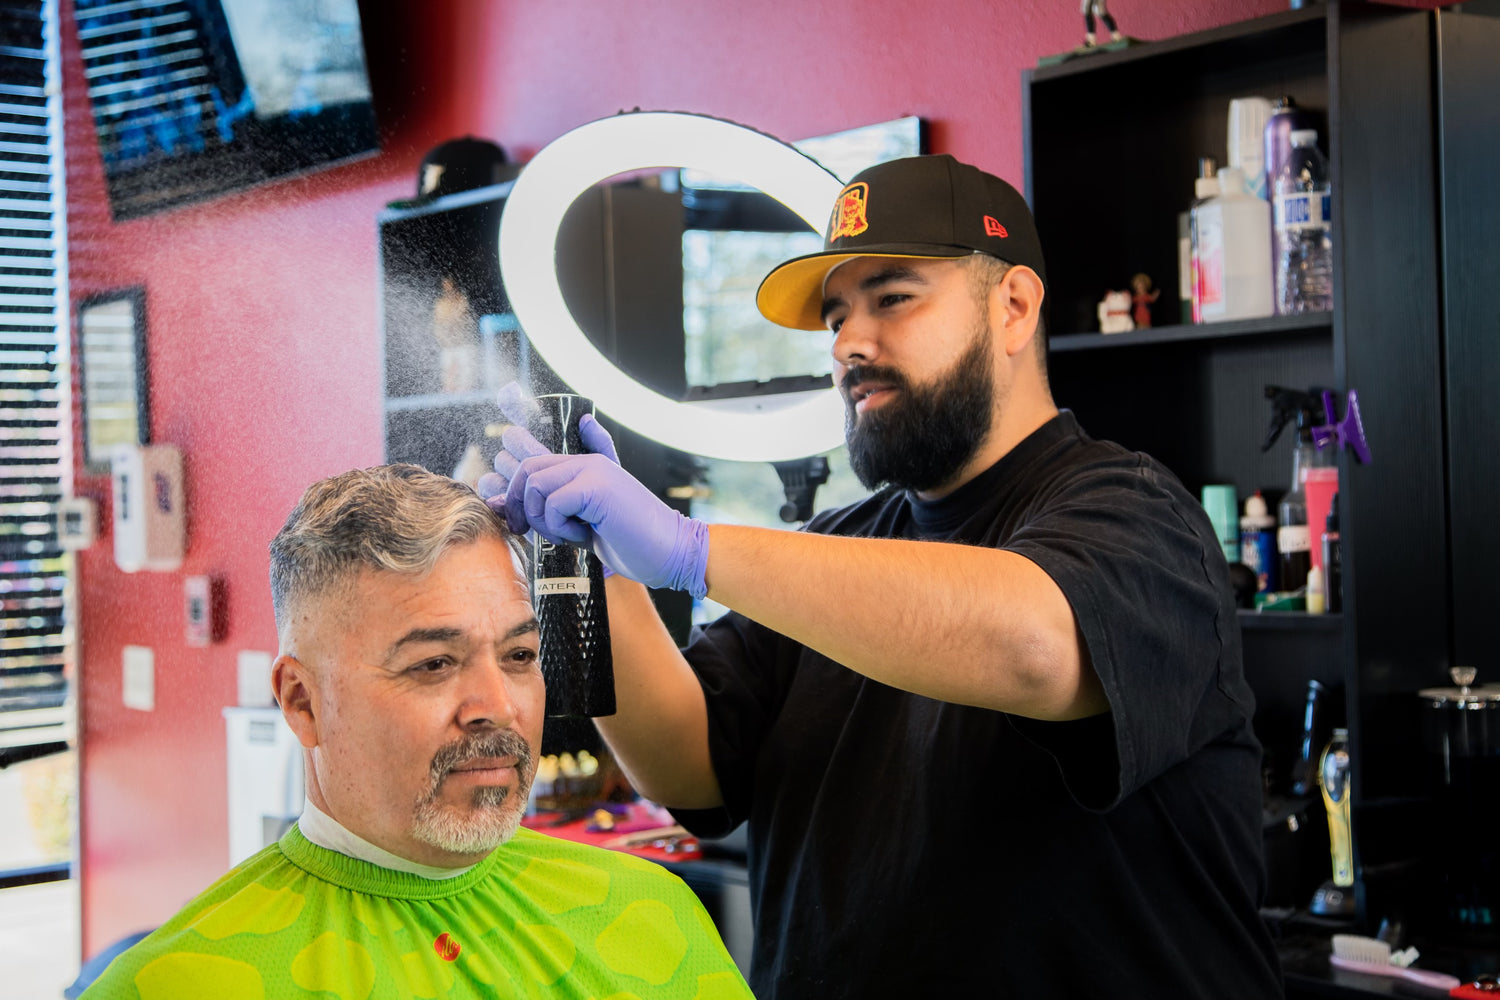 Barber in a black shirt spraying client with a water spray for a haircut